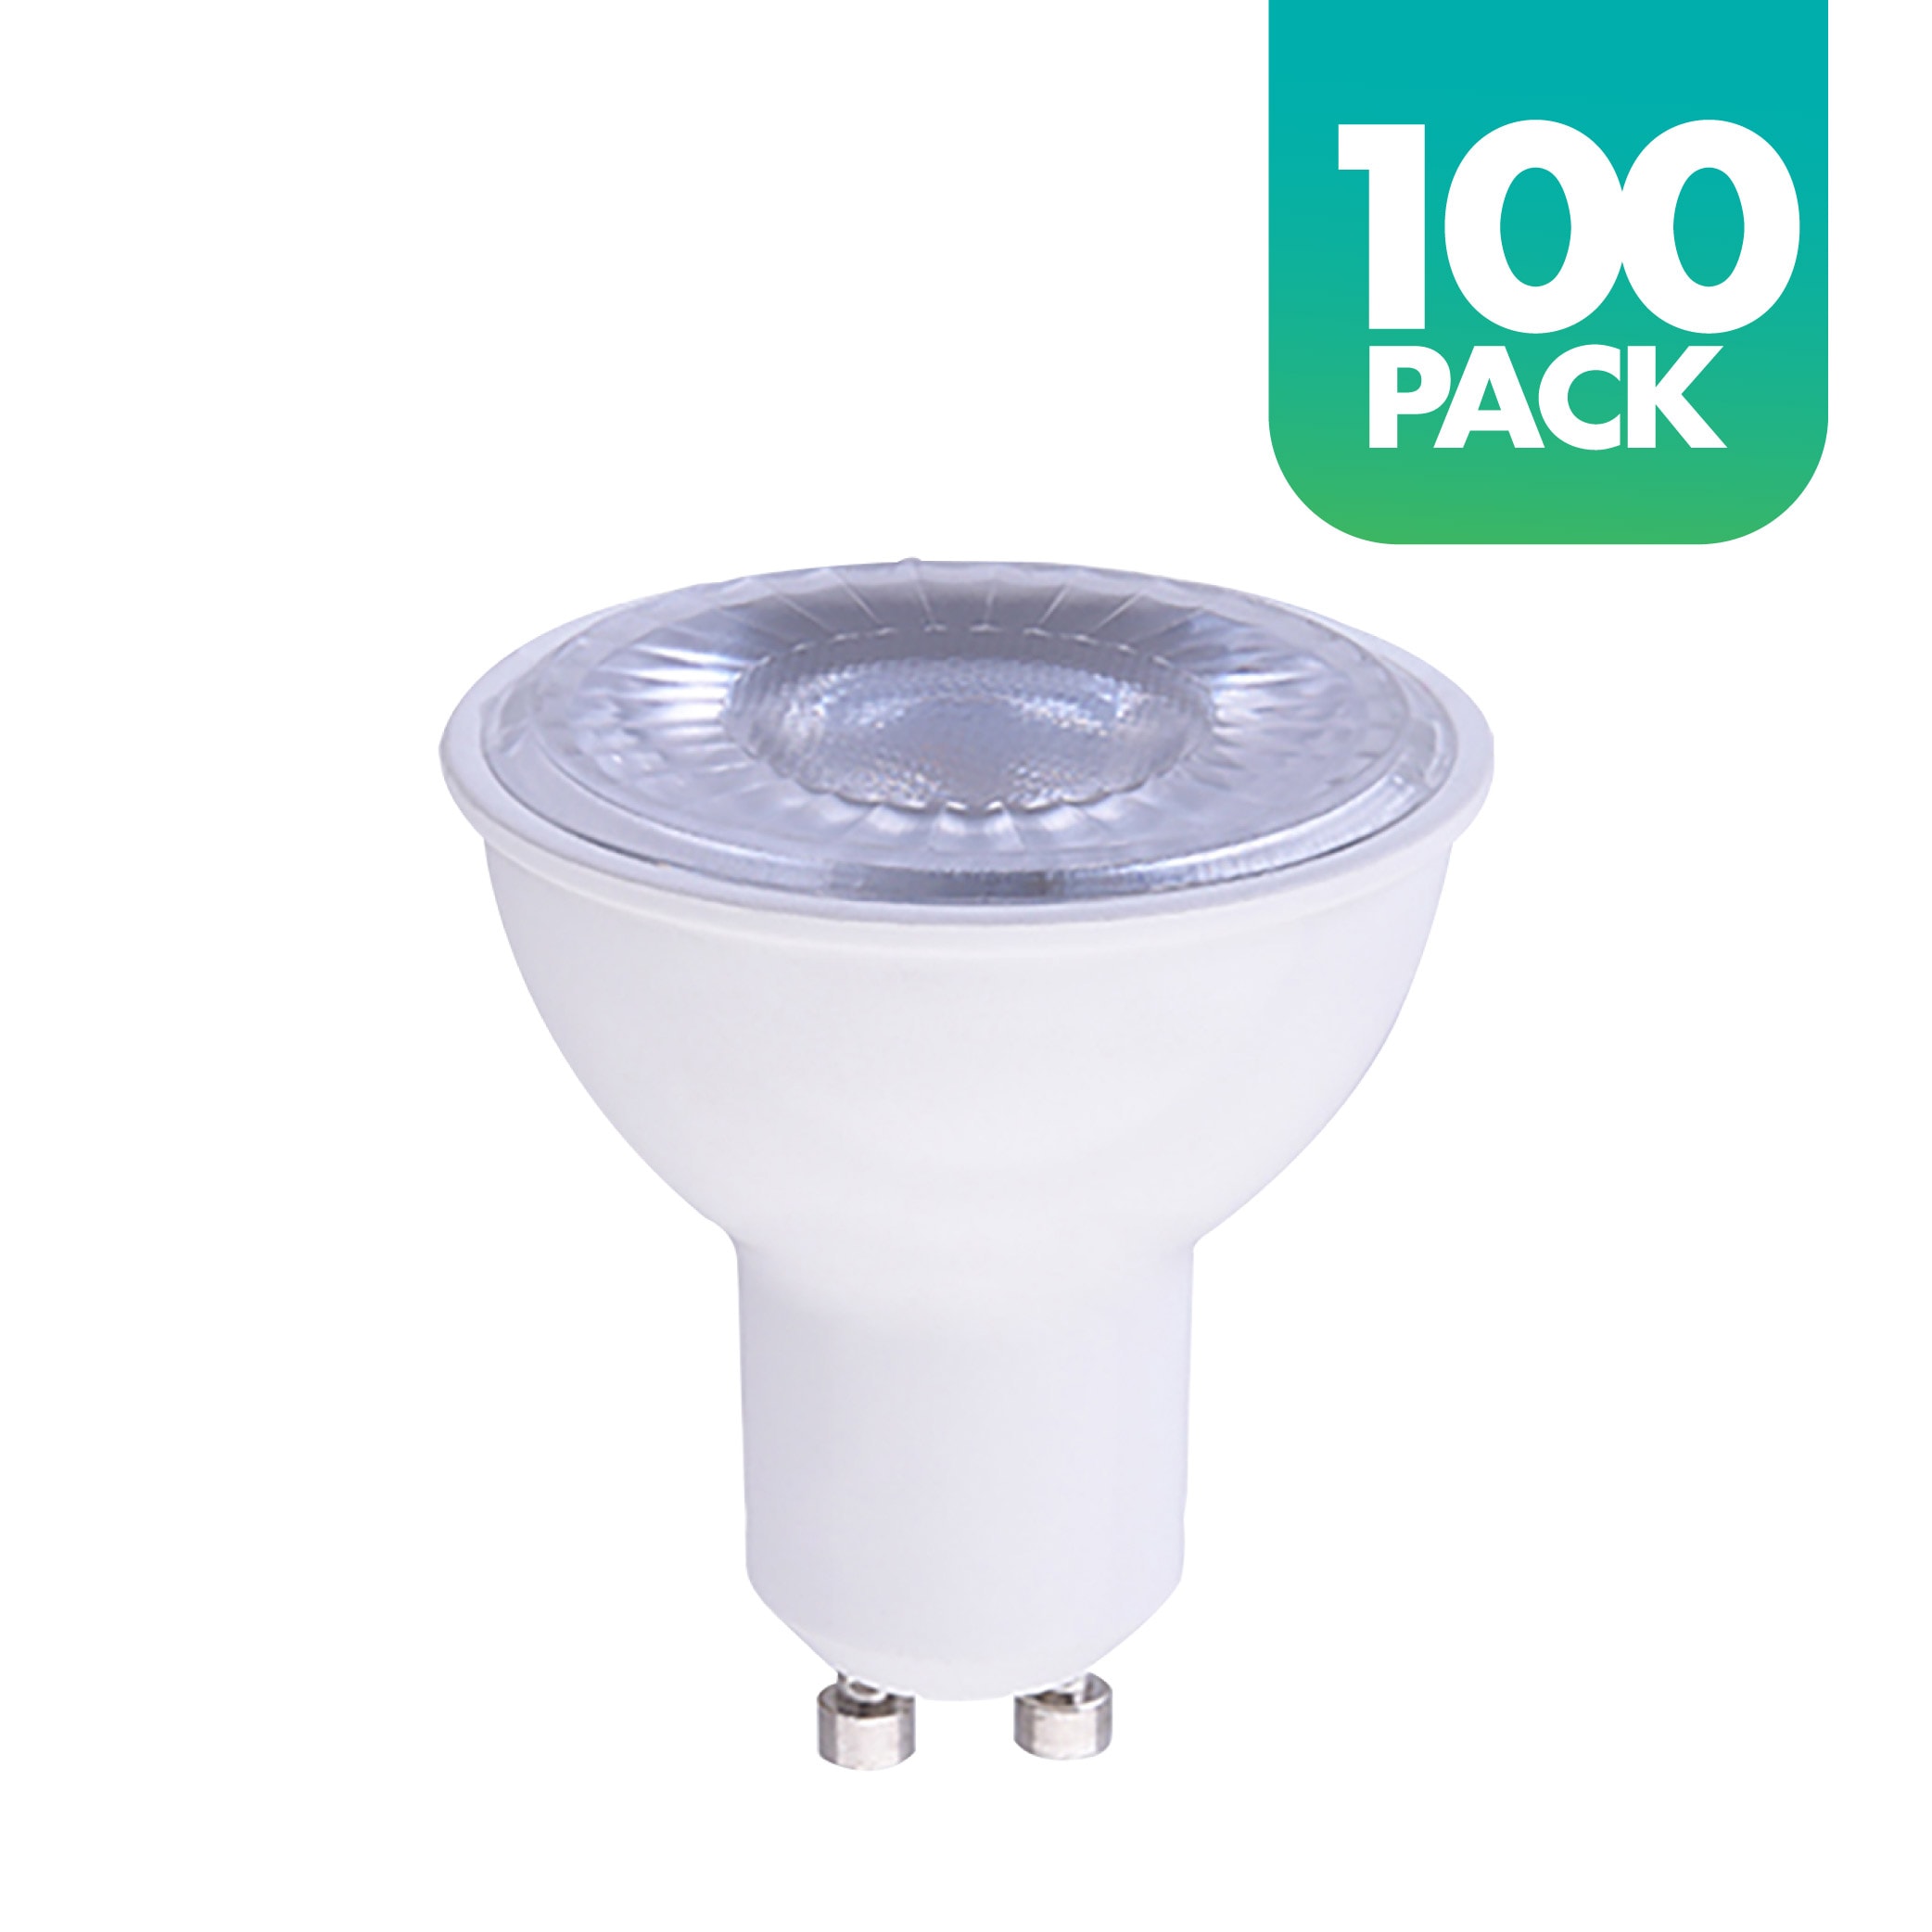 Simply Conserve 50-Watt EQ MR16 White GU10 Pin Dimmable LED Light Bulb (100-Pack) in the Spot & Flood Light Bulbs department at Lowes.com